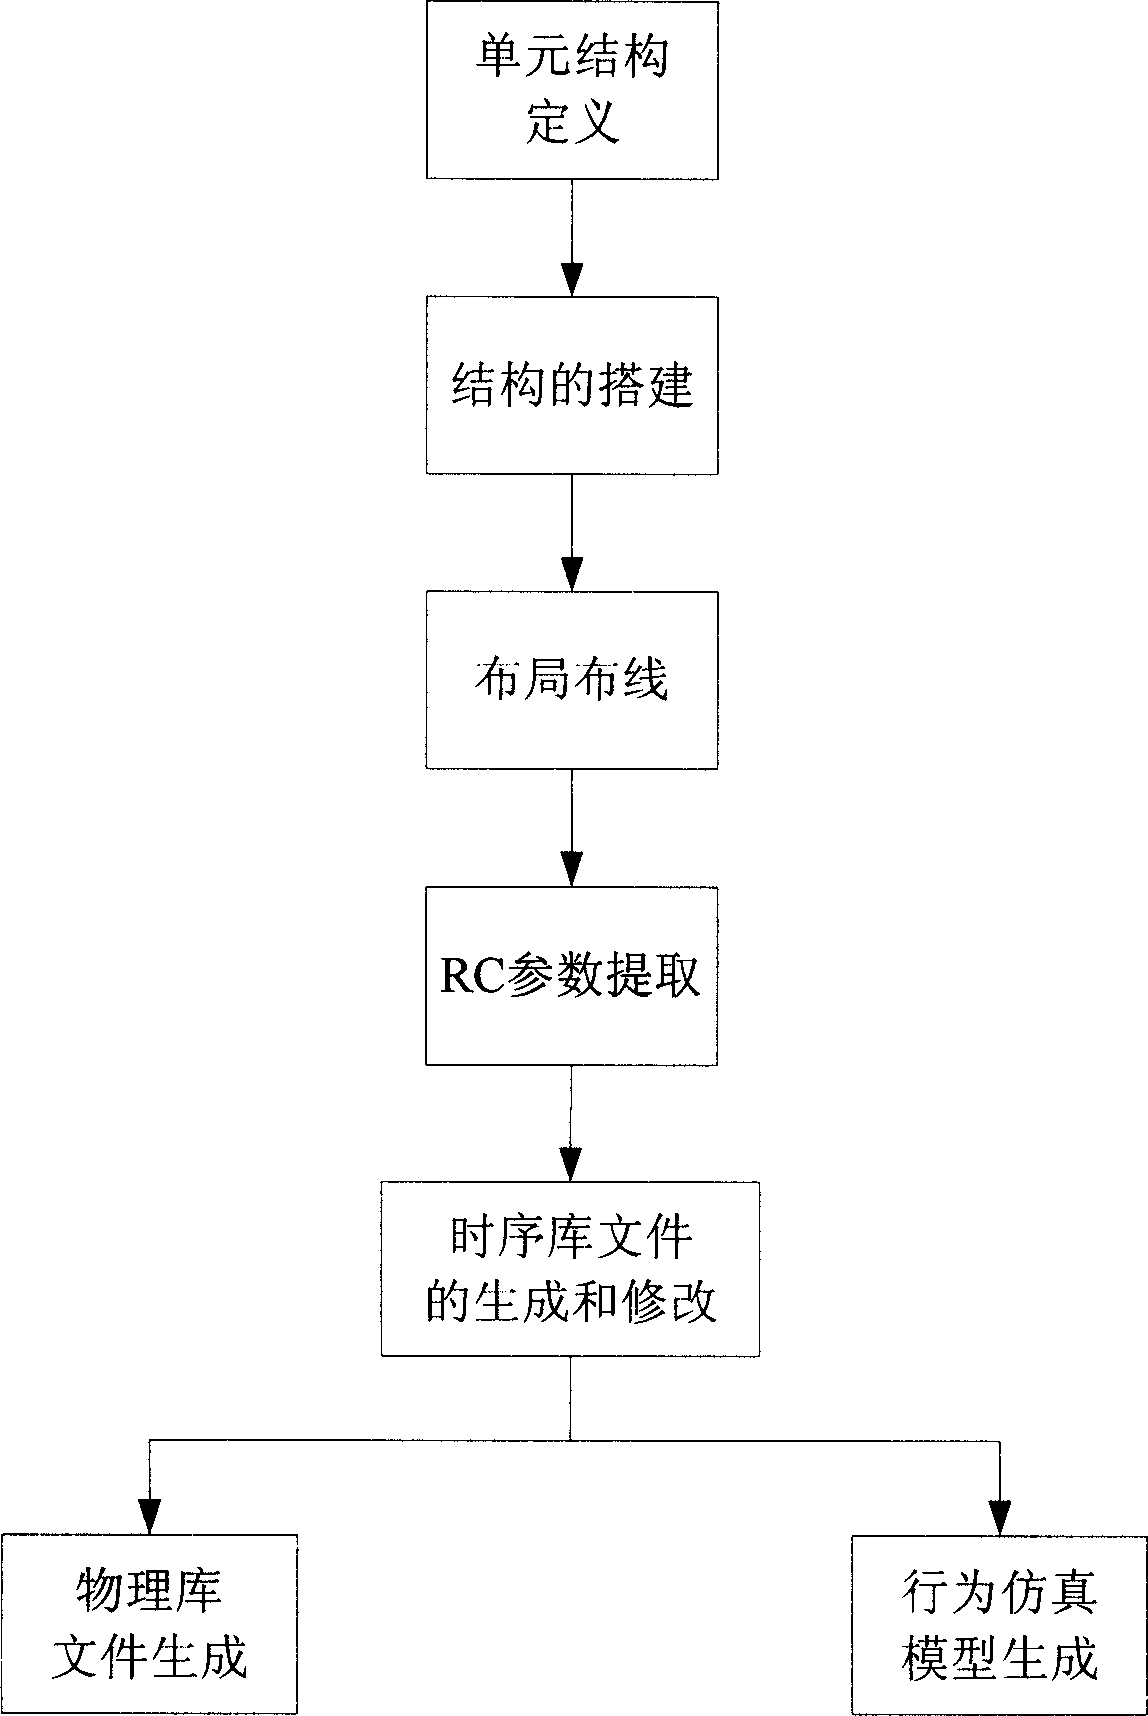 Method for generating gate controlled clock unit according to standard cell base element directly